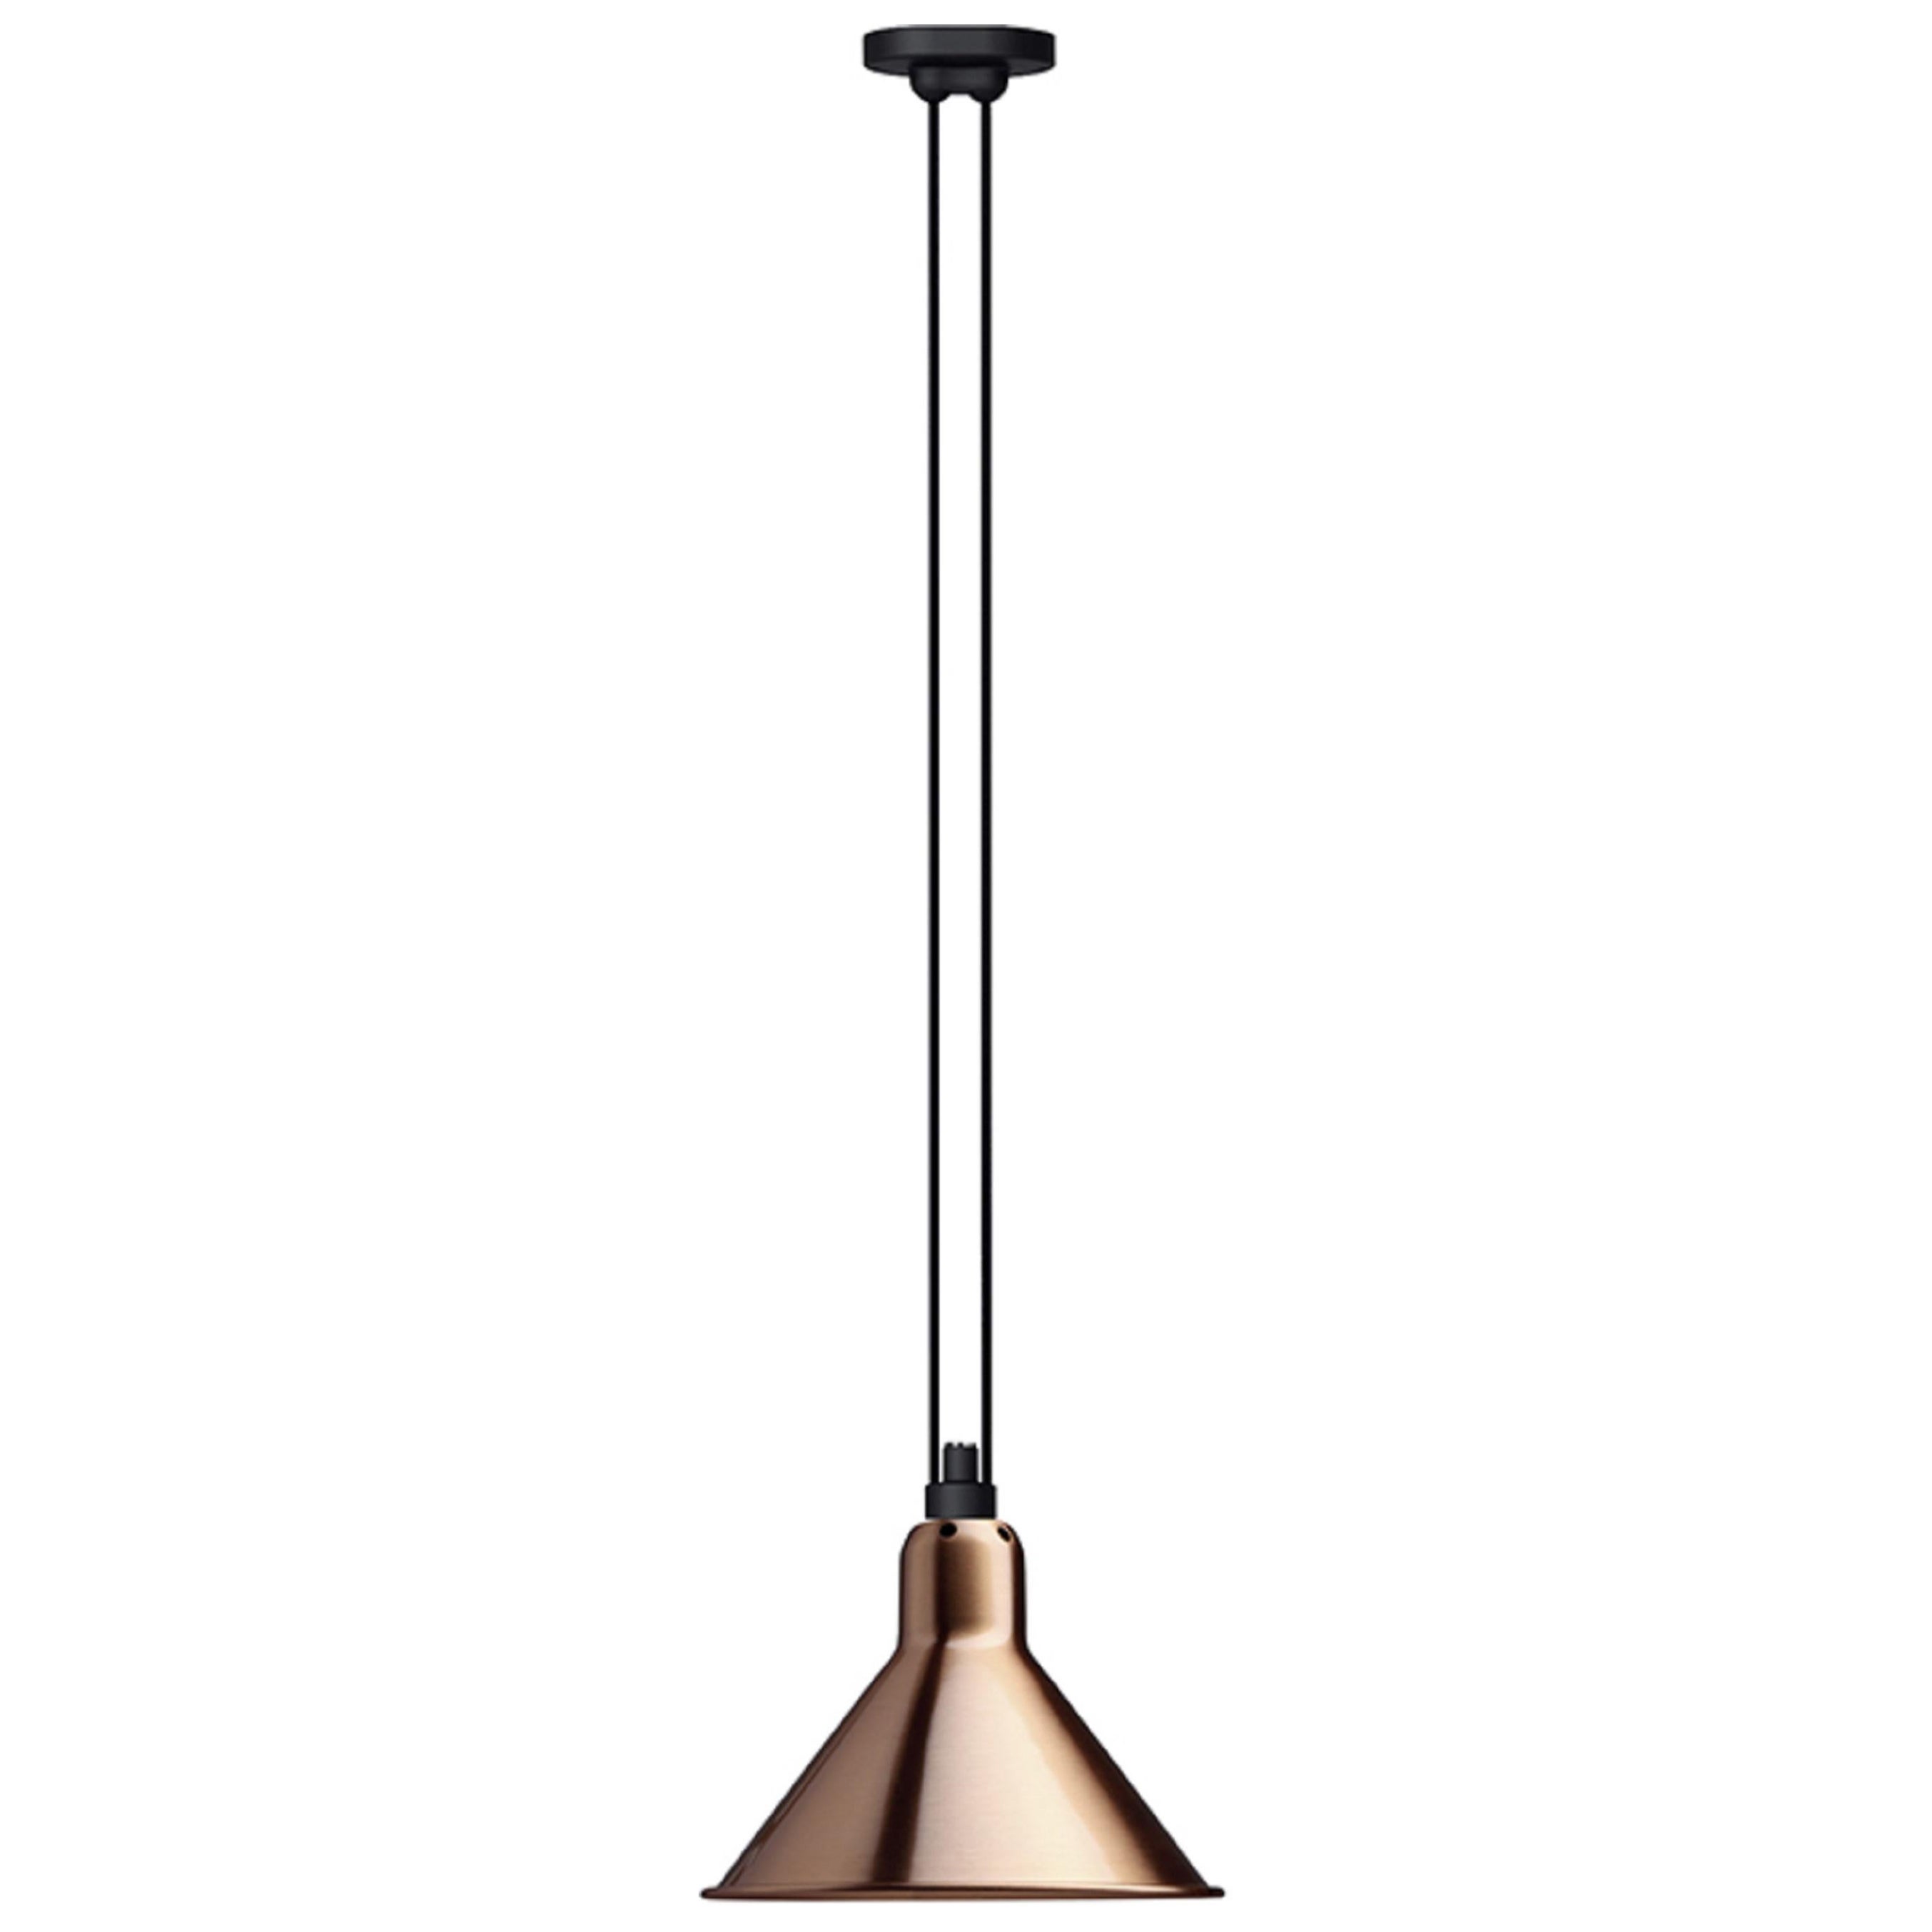 DCW Editions Les Acrobates N°322 Large Conic Pendant Lamp in Copper Shade For Sale